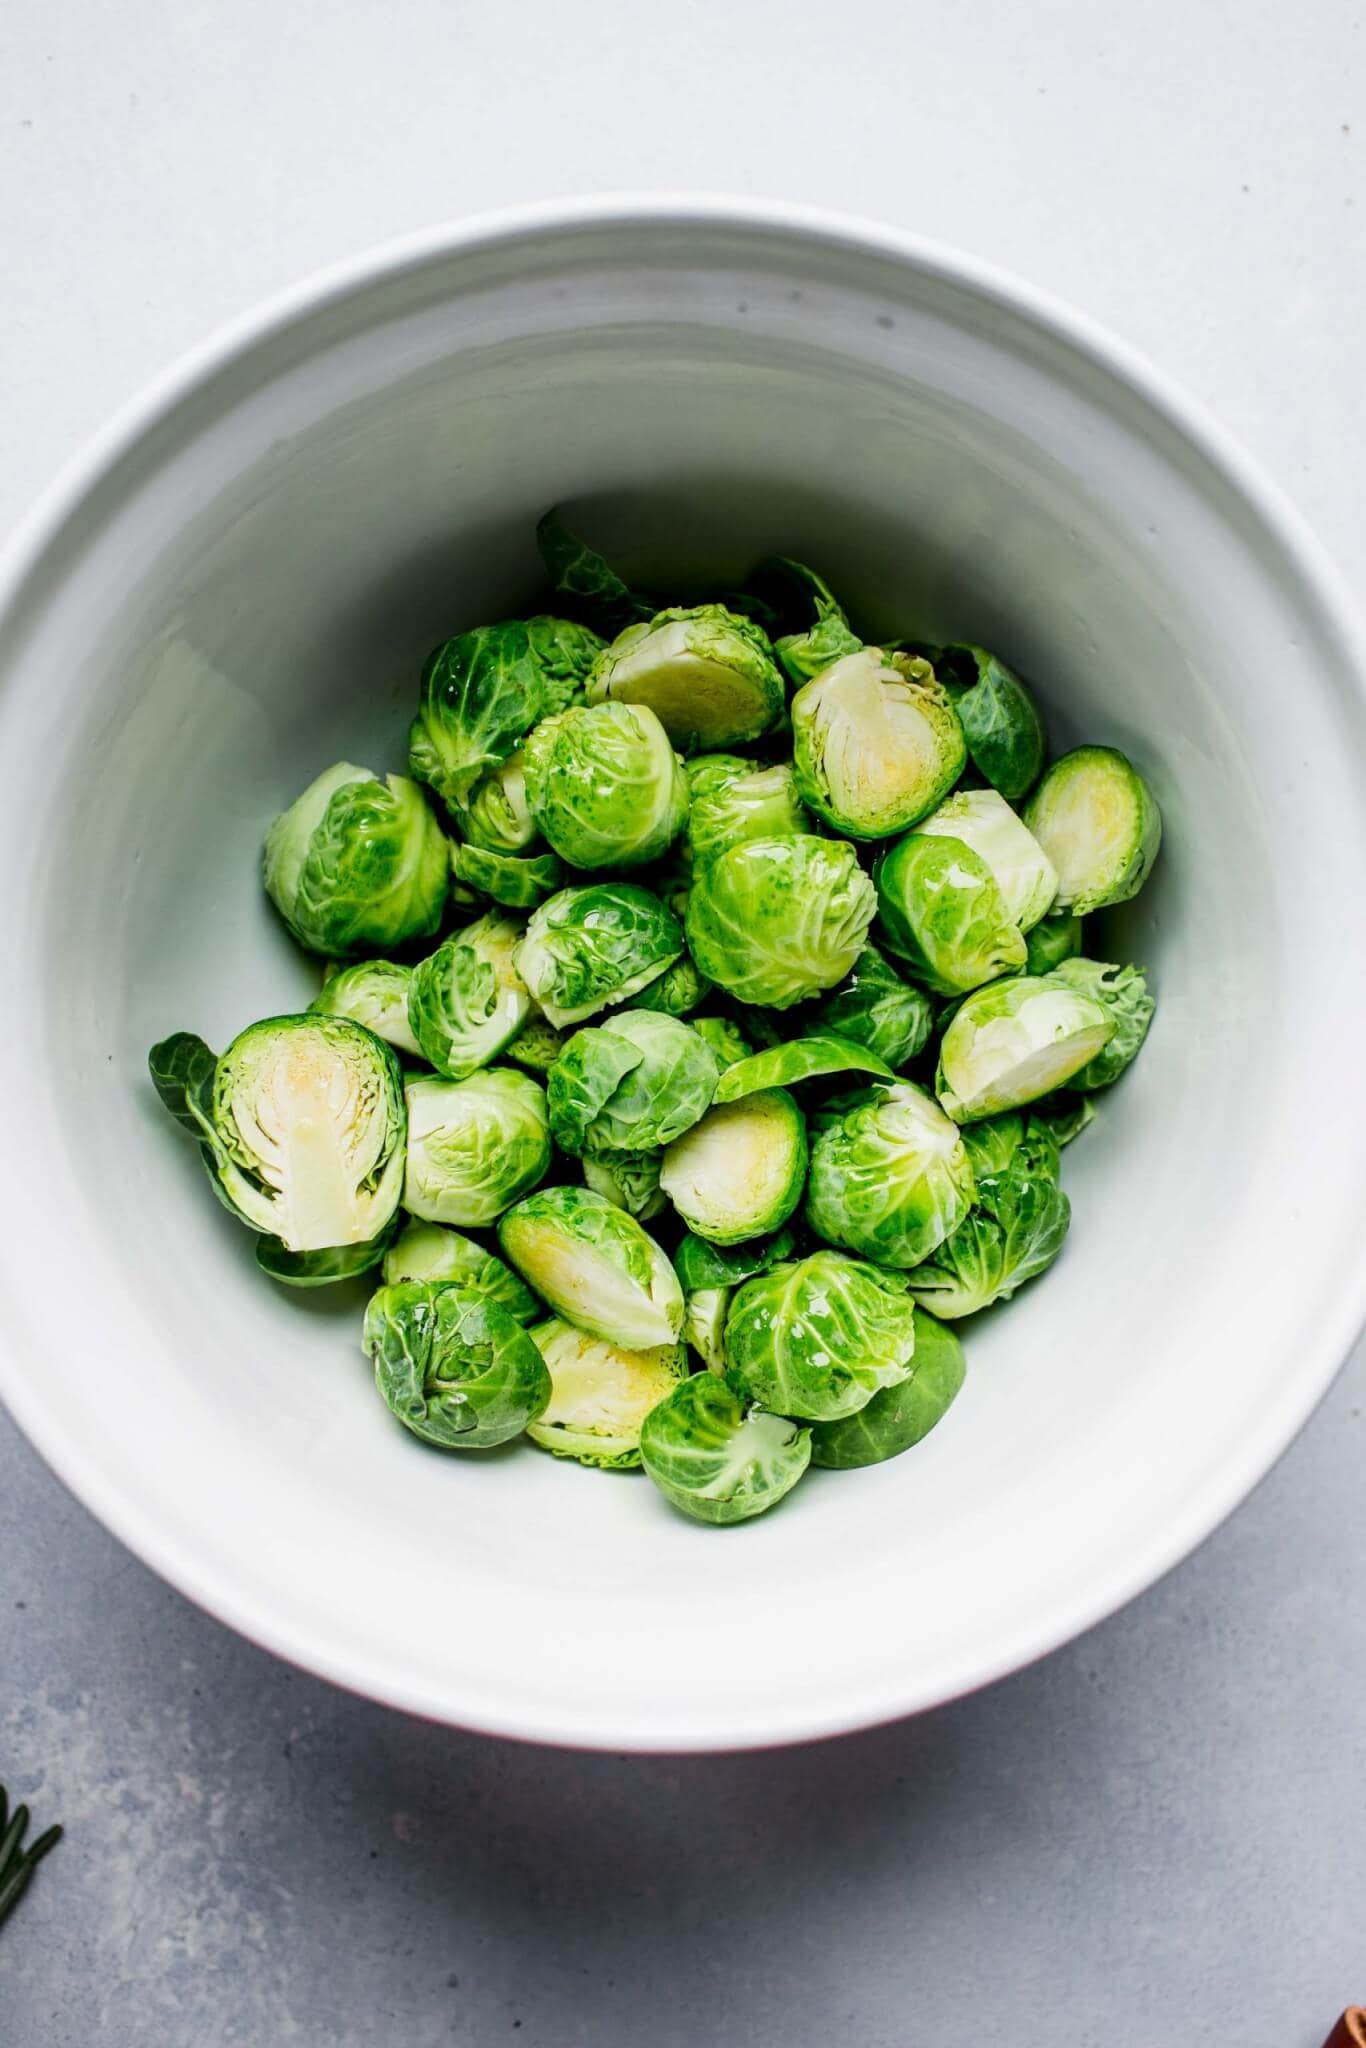 Halved brussel sprouts in white bowl.